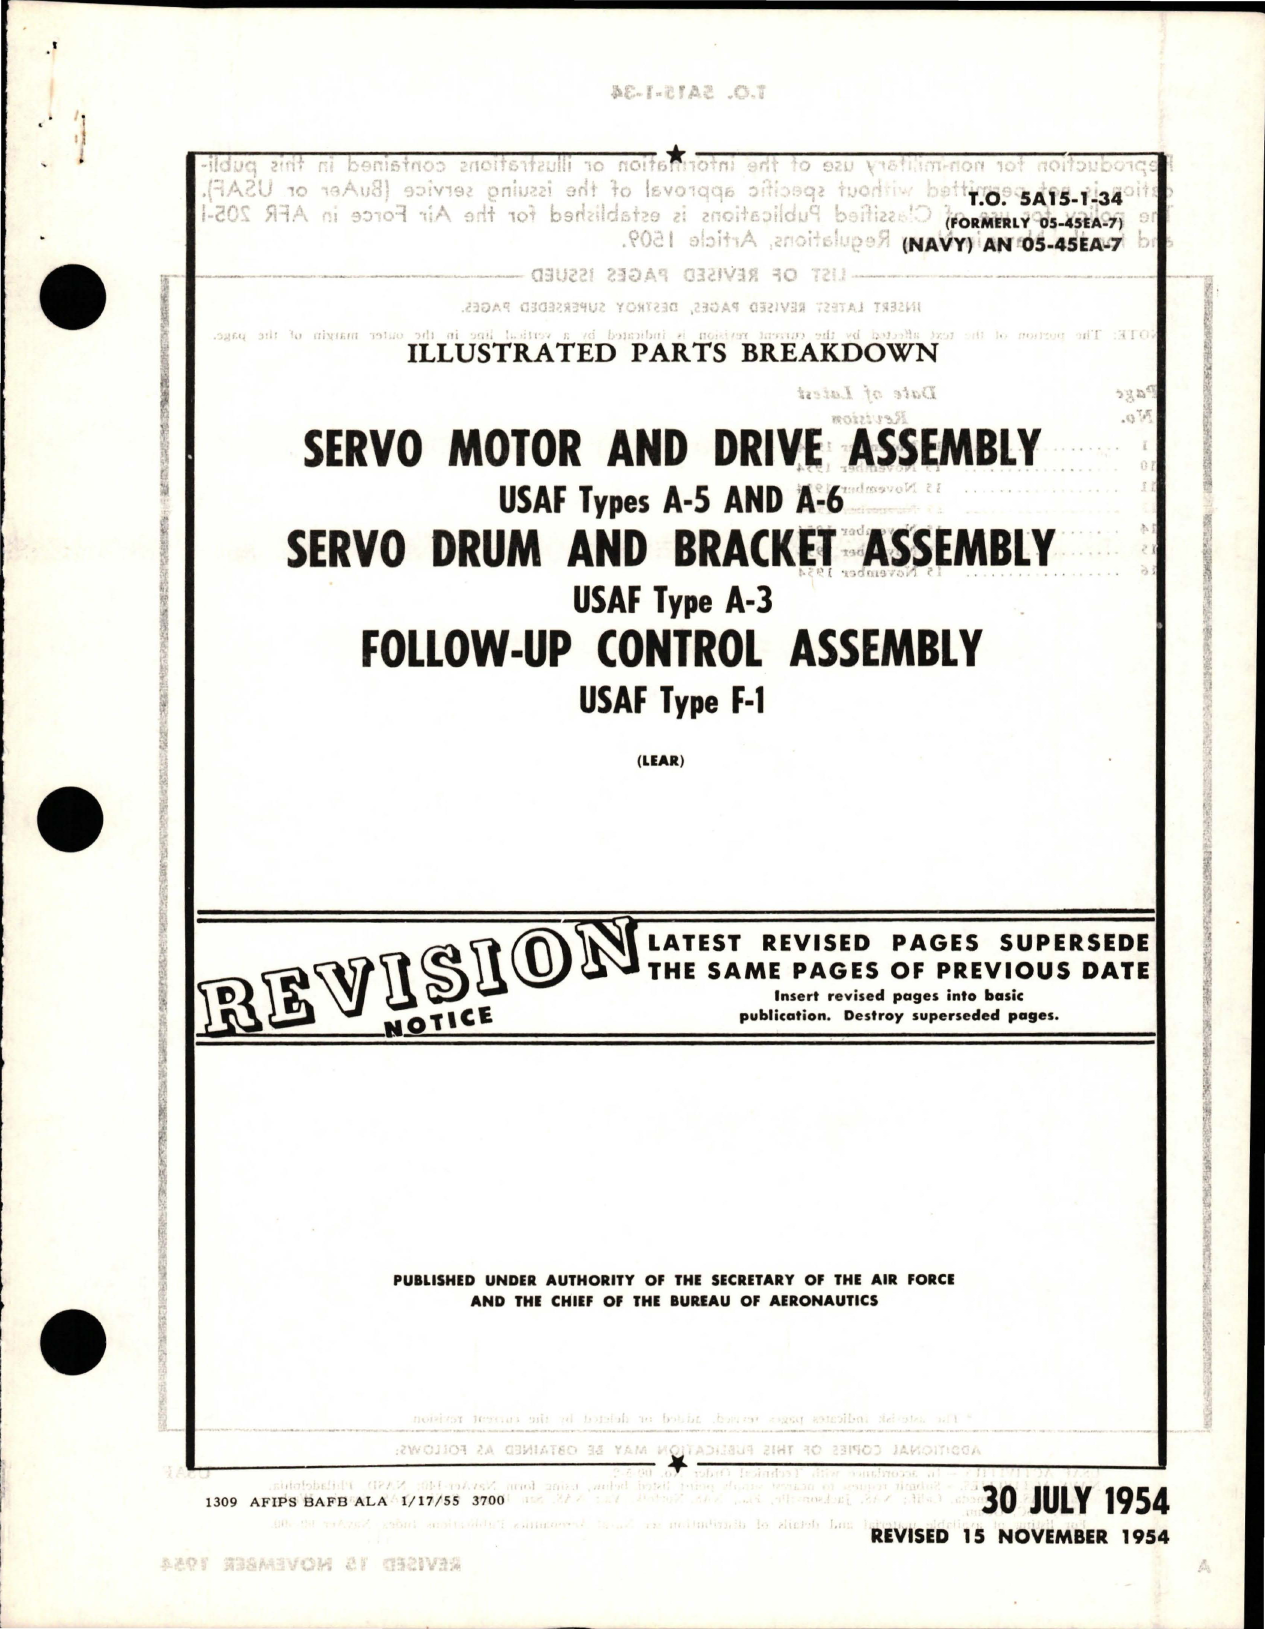 Sample page 1 from AirCorps Library document: Illustrated Parts for Servo Motor & Drive Assembly, Servo Drum and Bracket Assembly, and Follow-Up Control Assembly